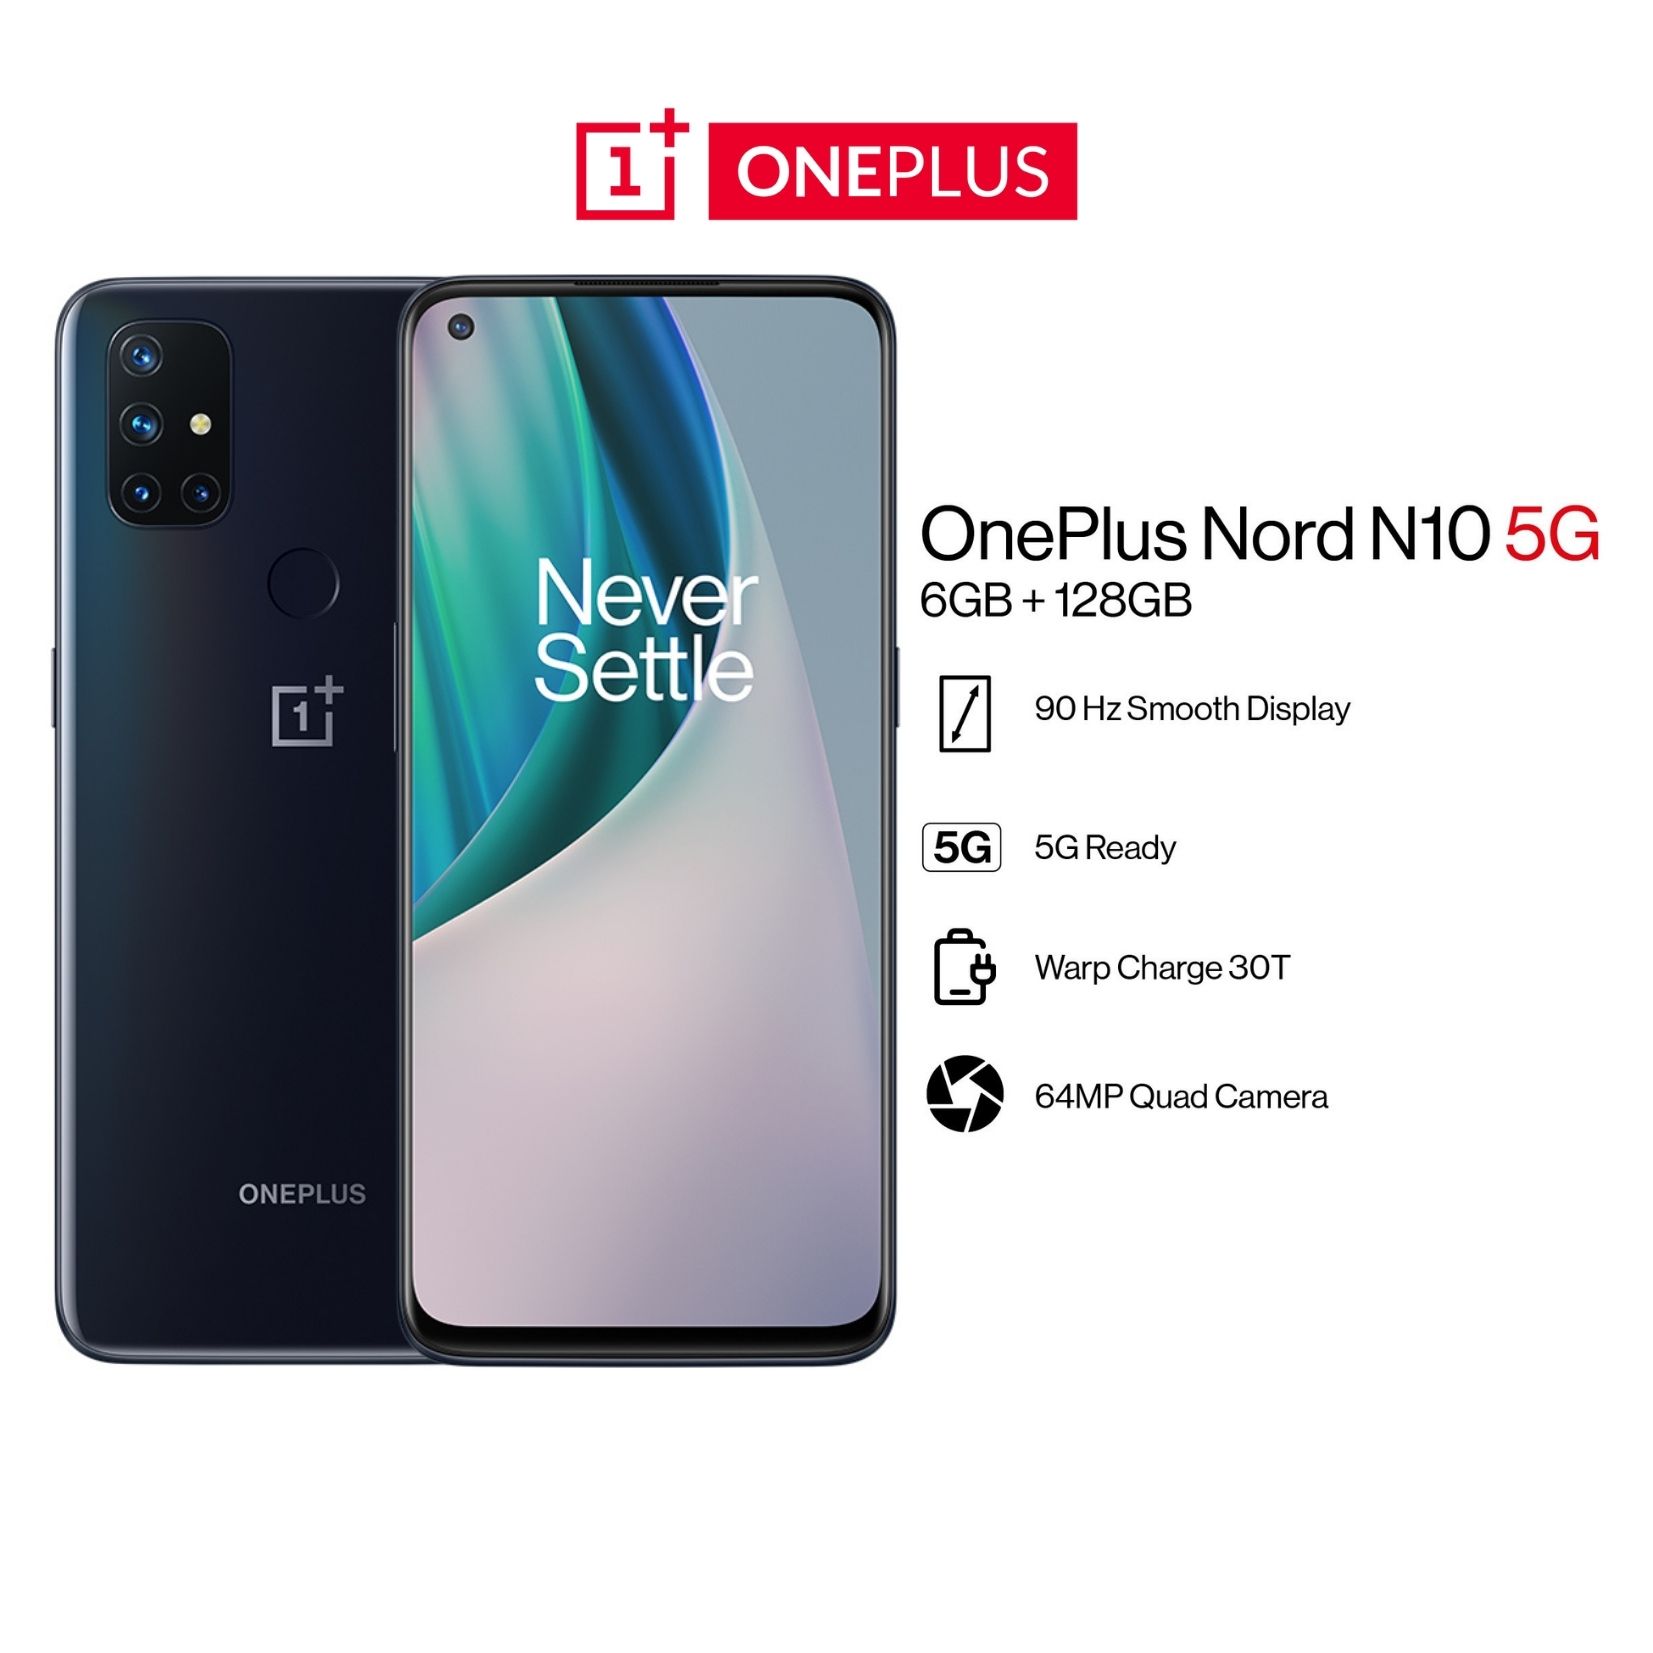 5g in nord price malaysia oneplus n10 OnePlus Nord